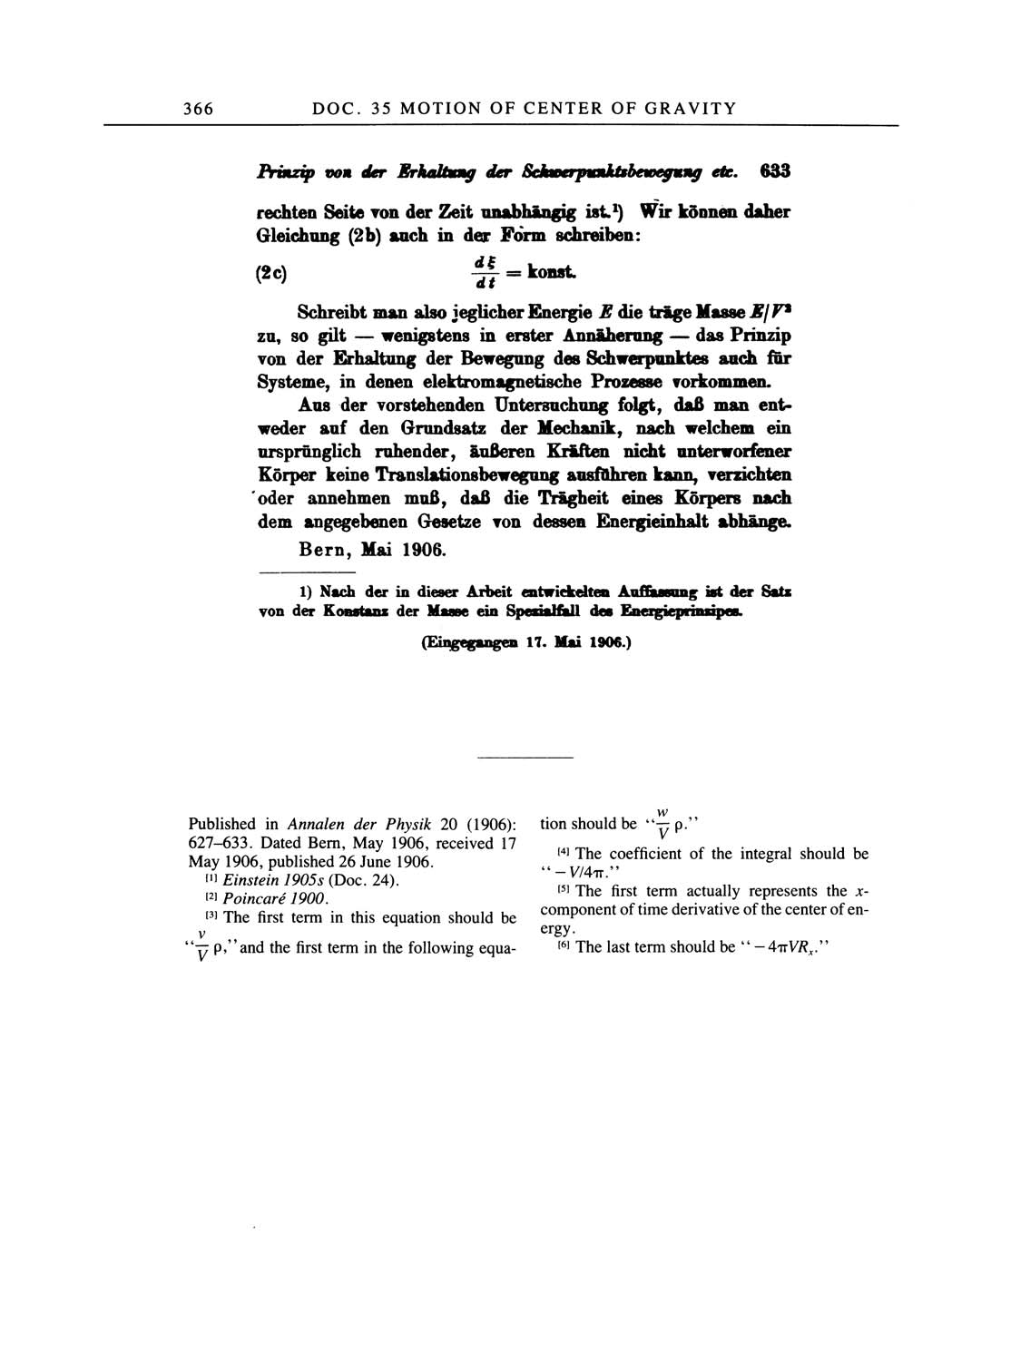 Volume 2: The Swiss Years: Writings, 1900-1909 page 366